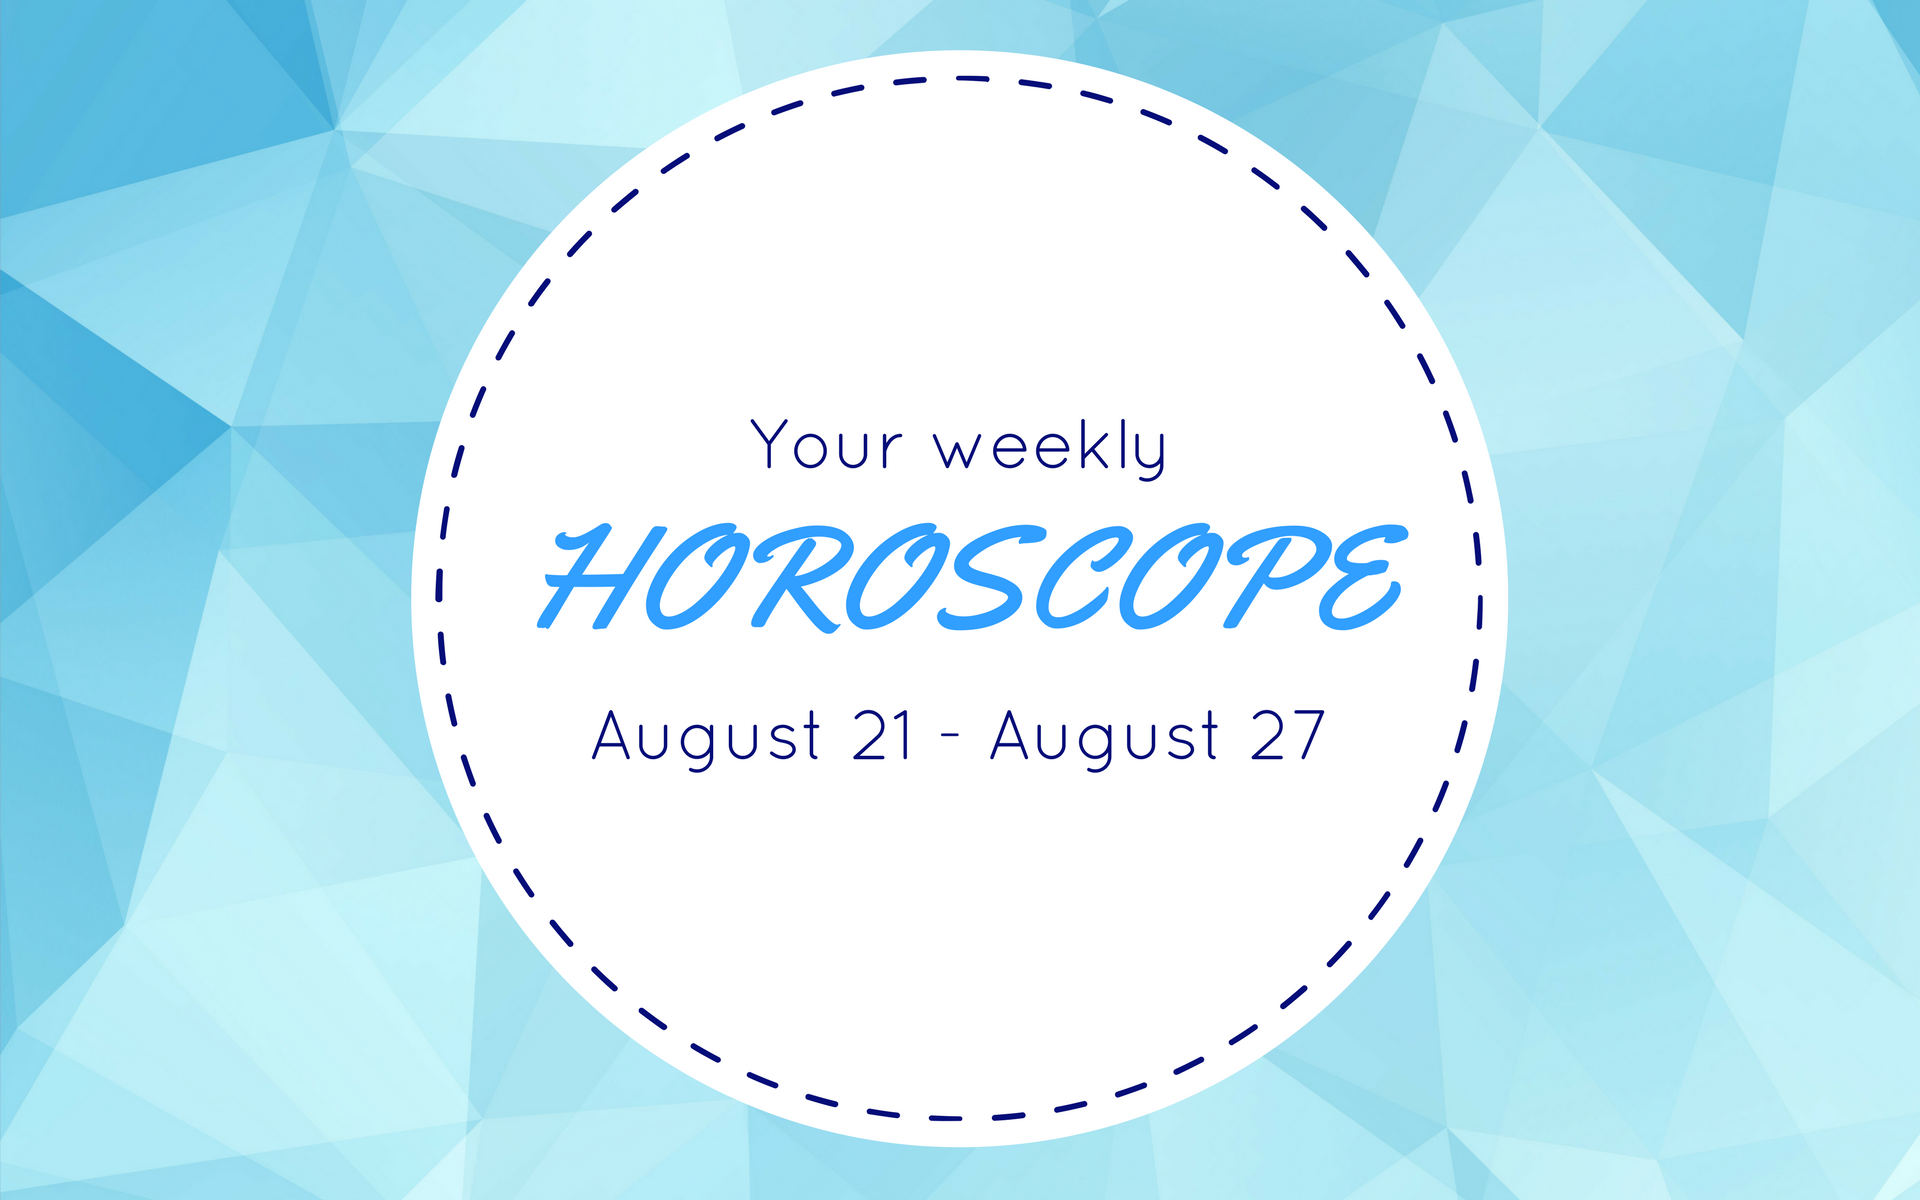 Your Weekly Horoscope: August 21 - August 27